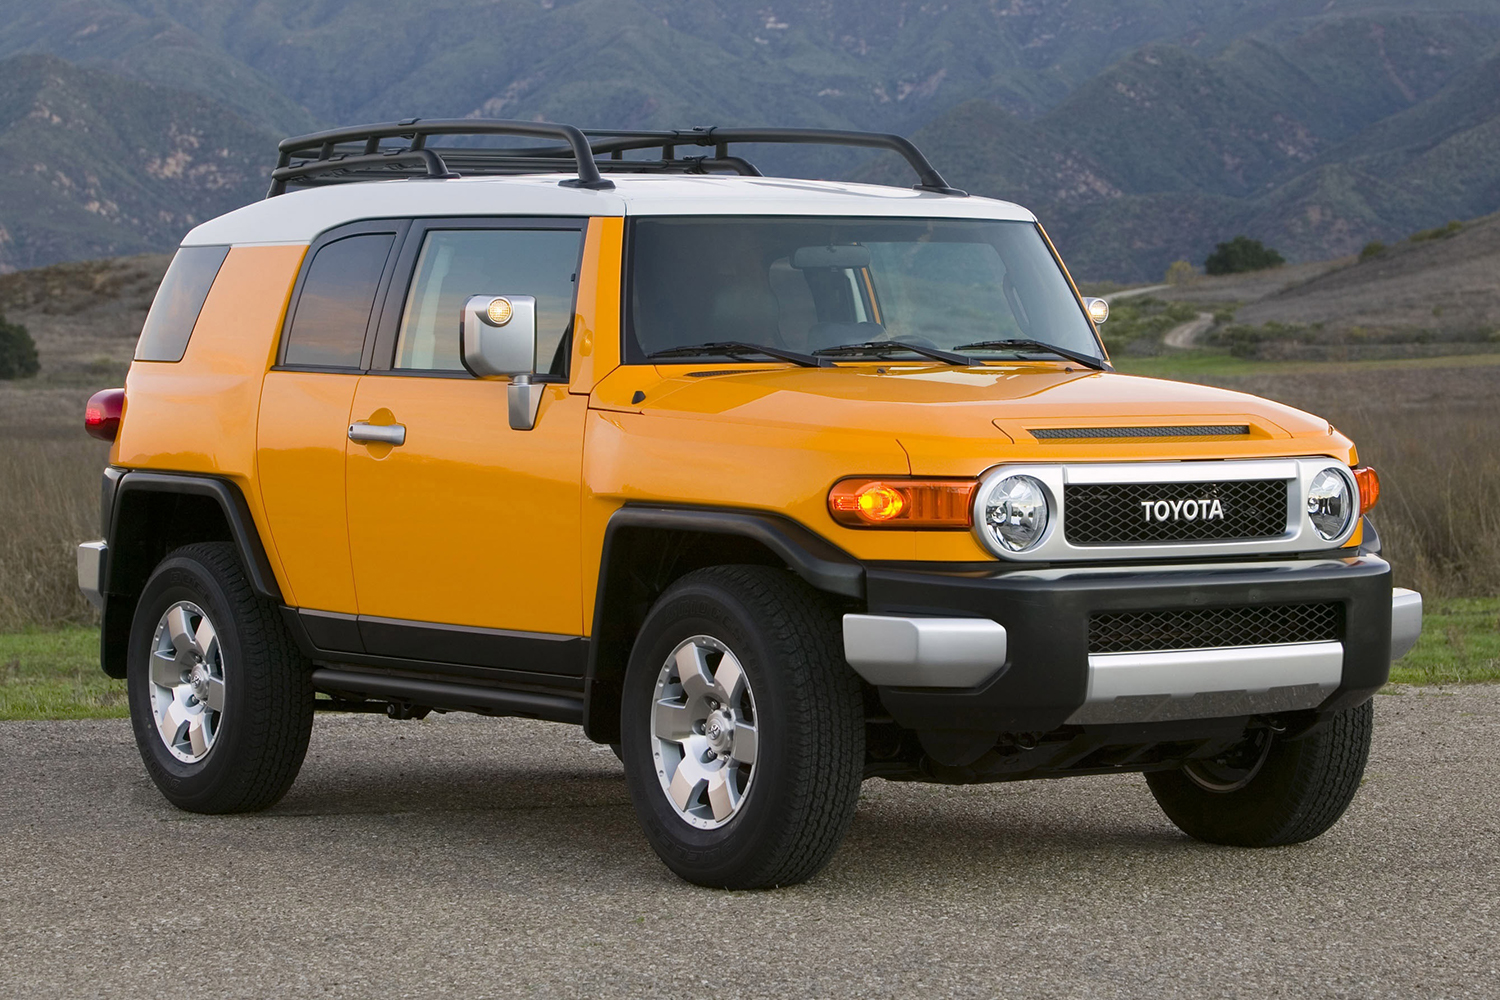 A yellow Toyota FJ Cruiser sitting still on the cement. The vintage off-road SUV was discontinued in 2014 but increasingly popular in 2021.